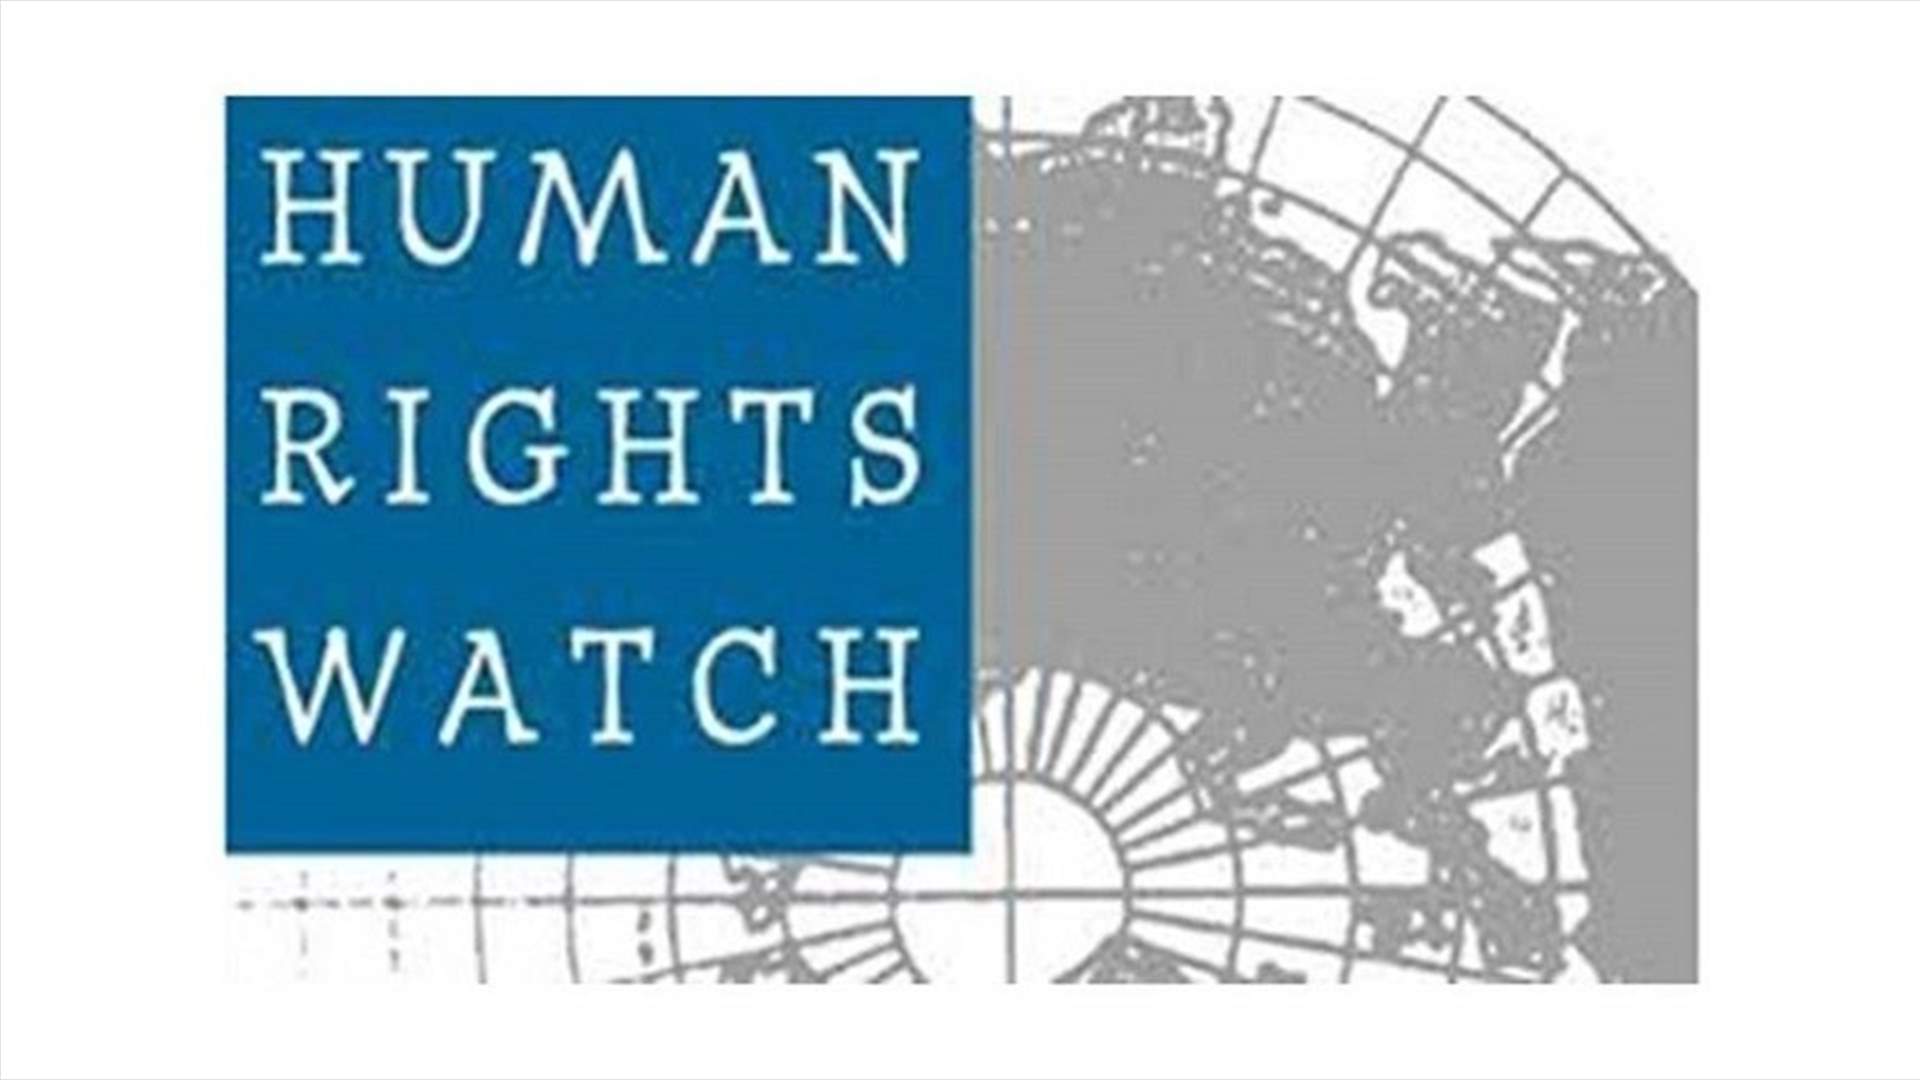 HRW: Lebanese authorities are failing to address acute economic and political crisis